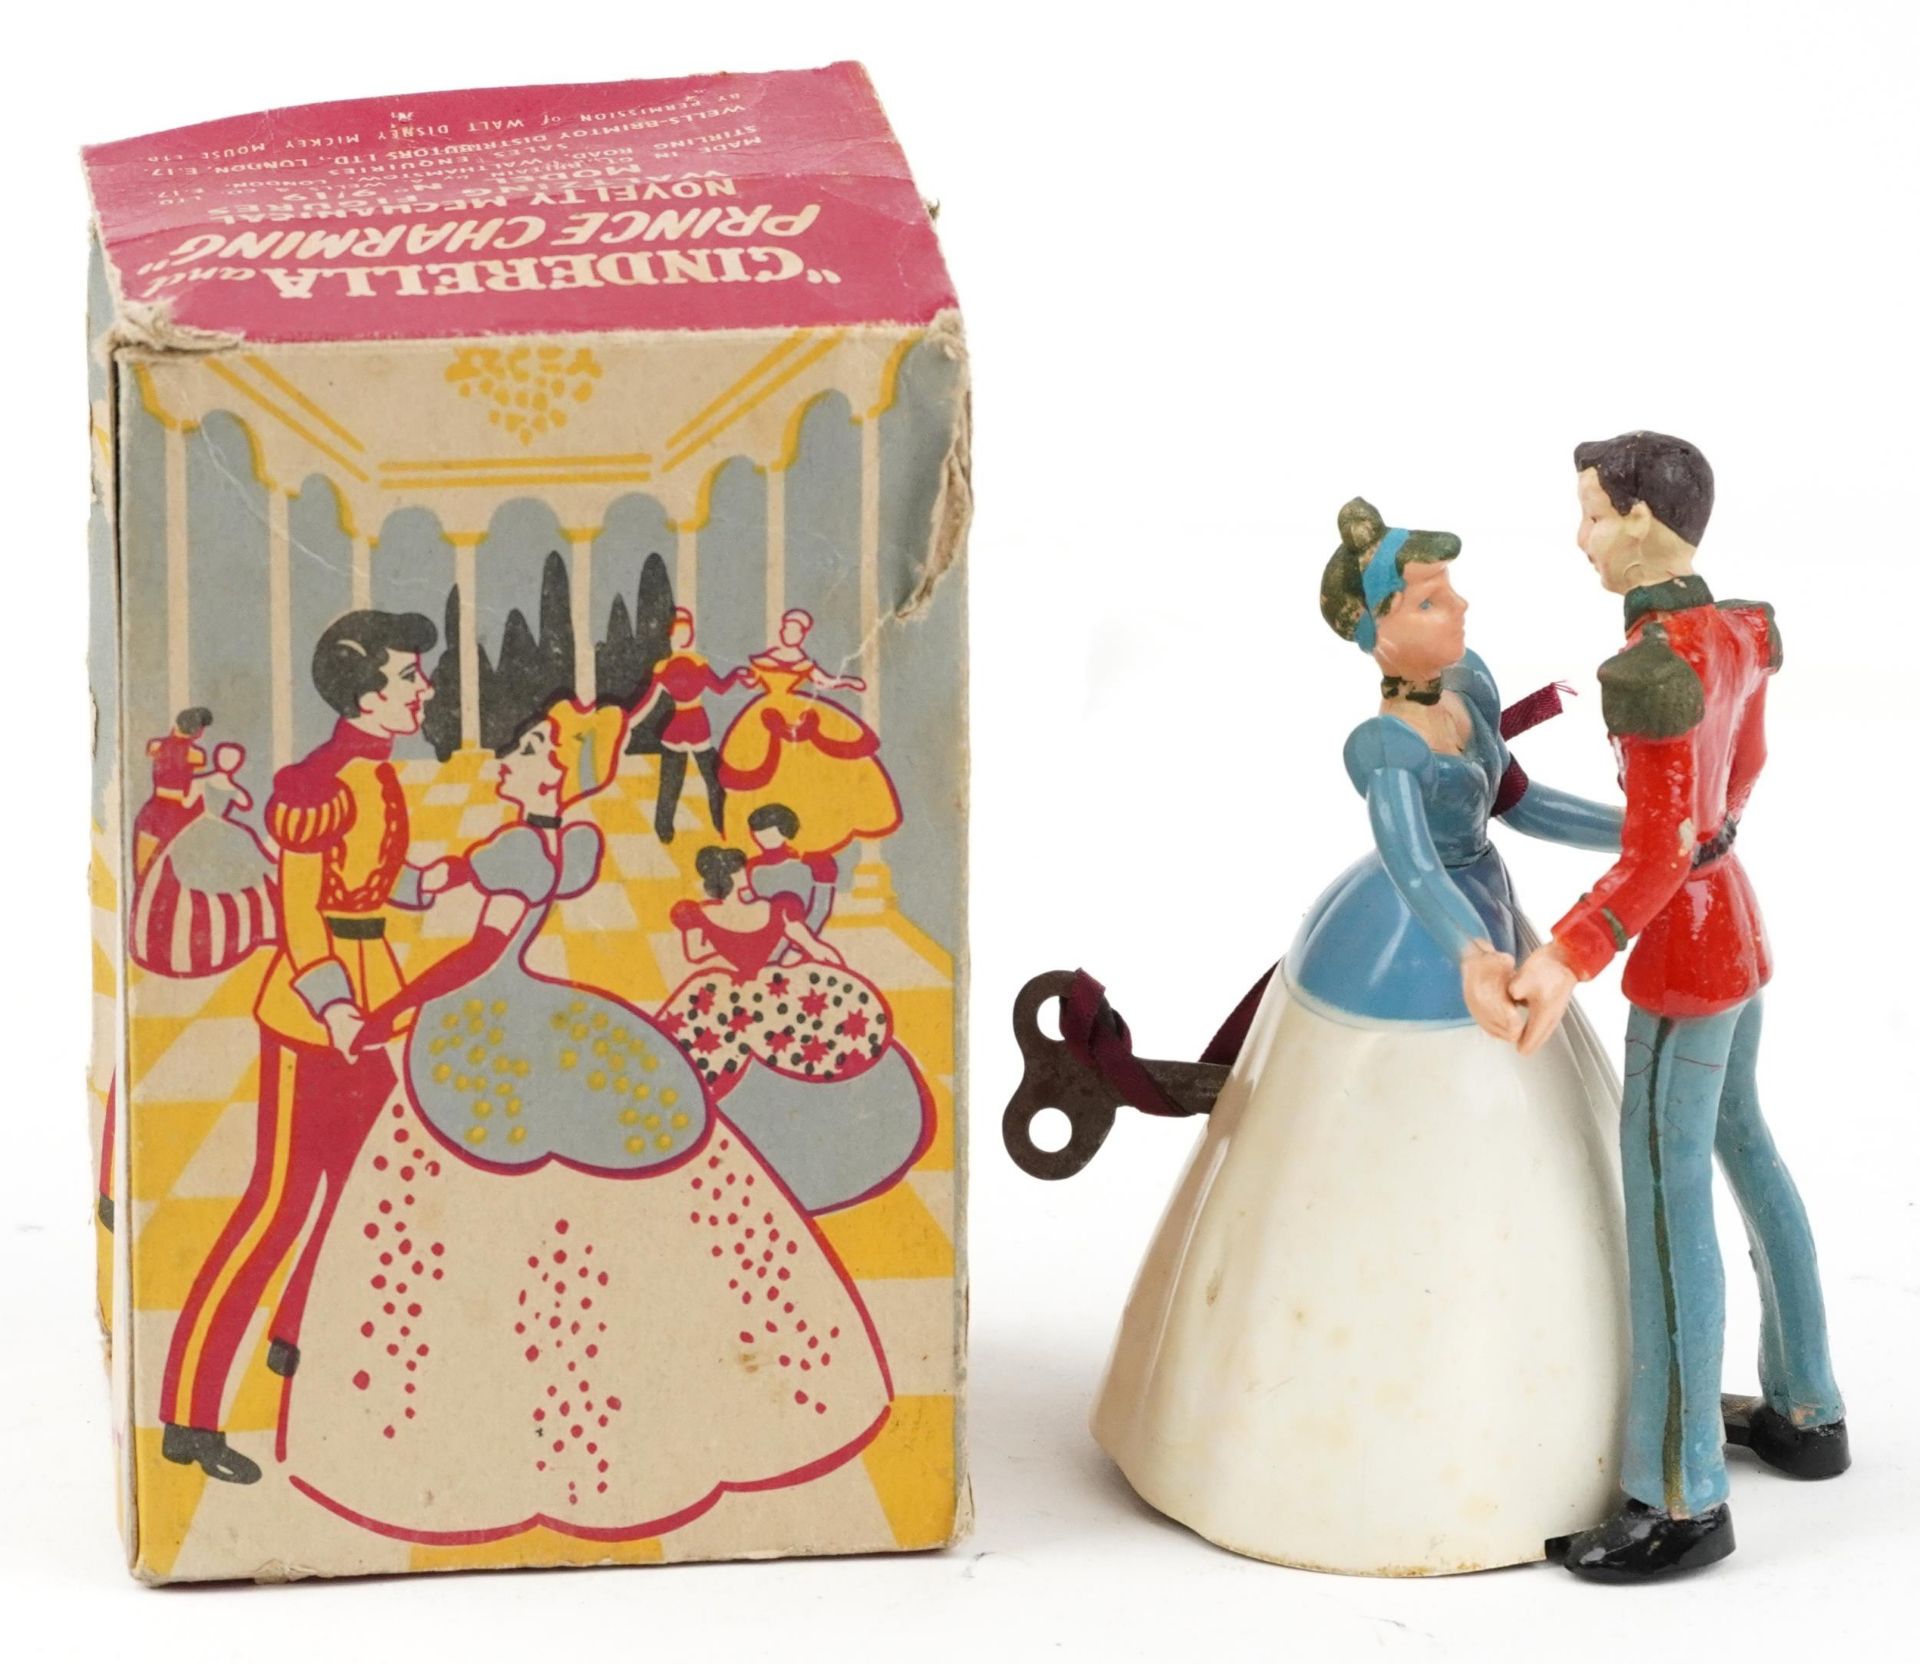 Vintage clockwork Cinderella and Prince Charming novelty mechanical waltzing figures with box - Image 2 of 3